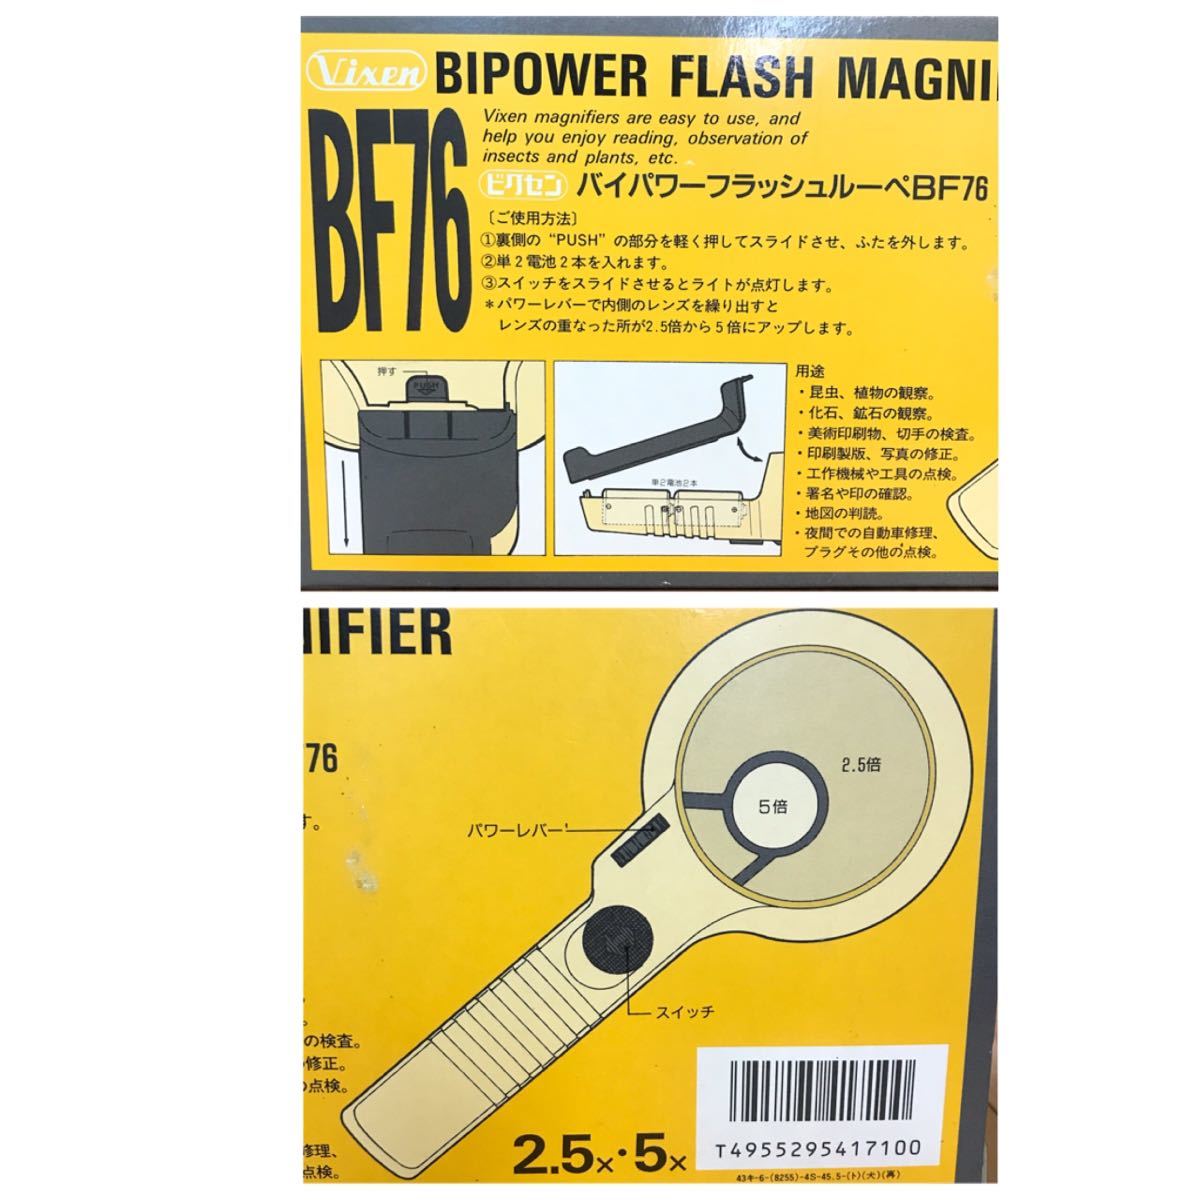  free shipping / unused /Vixen Vixen bai power flash magnifier BF76 2.5 times *5 times change possibility /2.5x*5x light attaching in stock magnifier magnifying glass insect glasses 